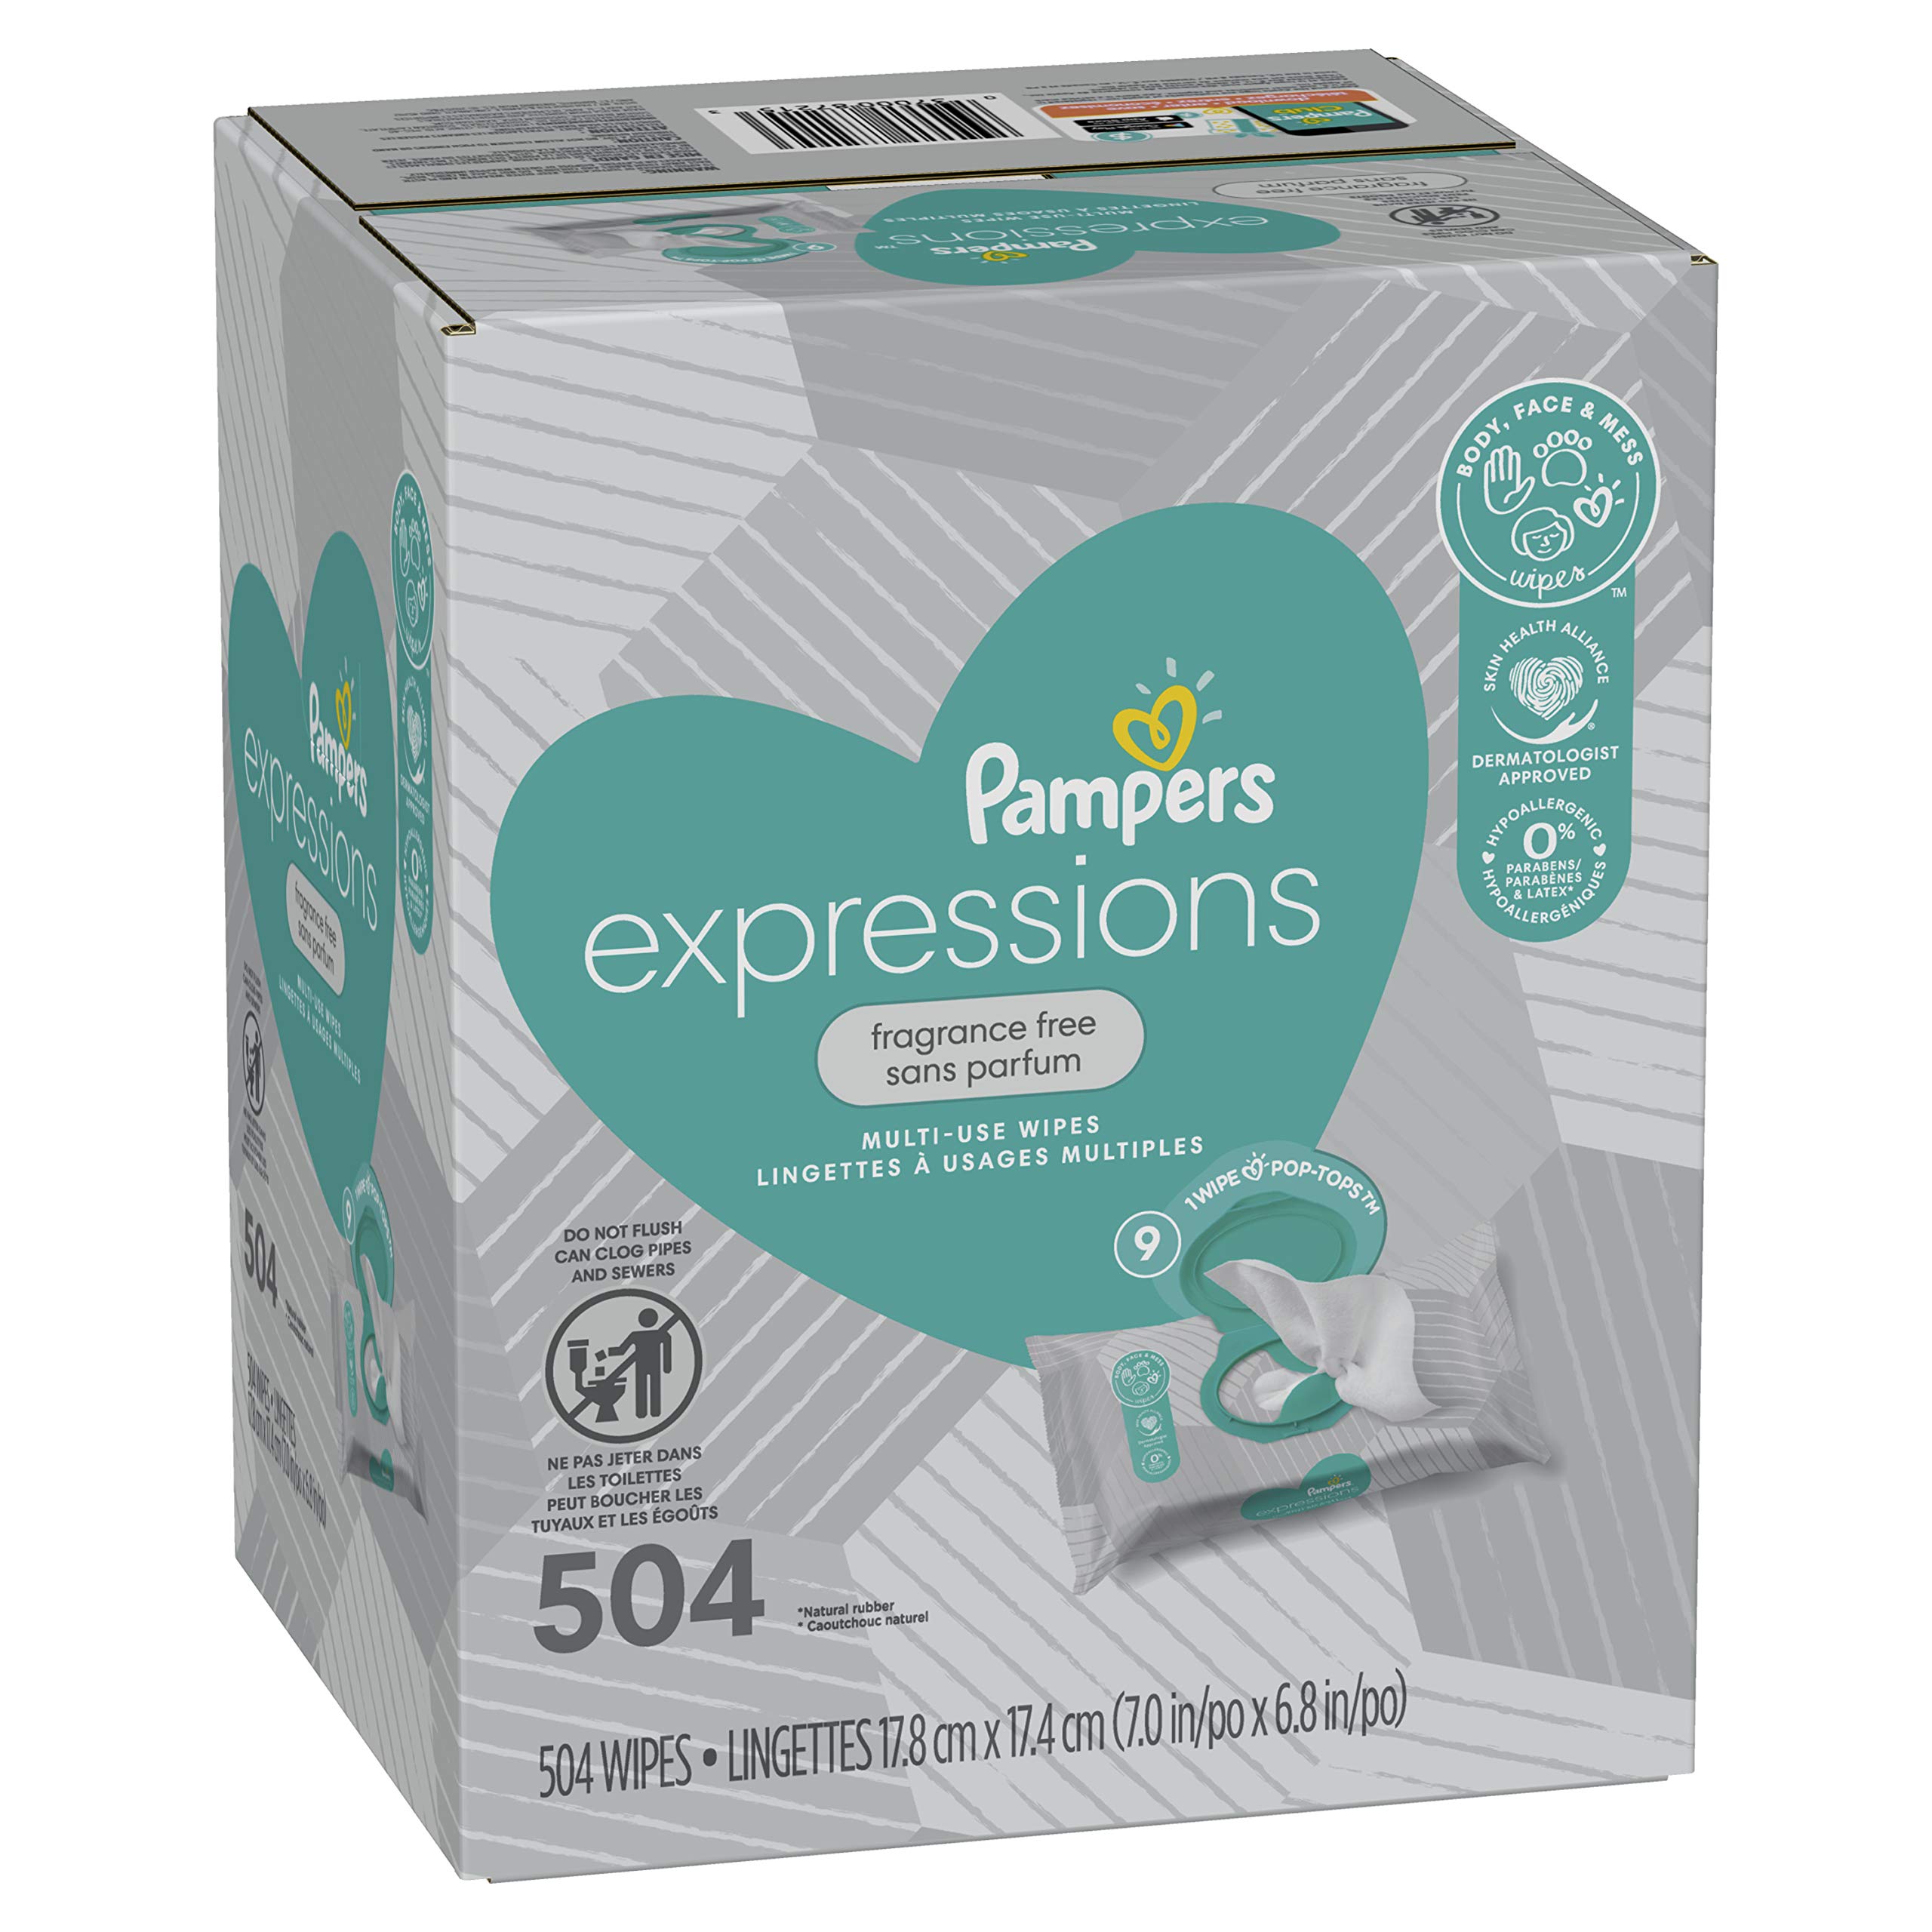 Pampers Baby Wipes Multi-Use Fragrance Free 9X Pop-Top Packs 504 Count